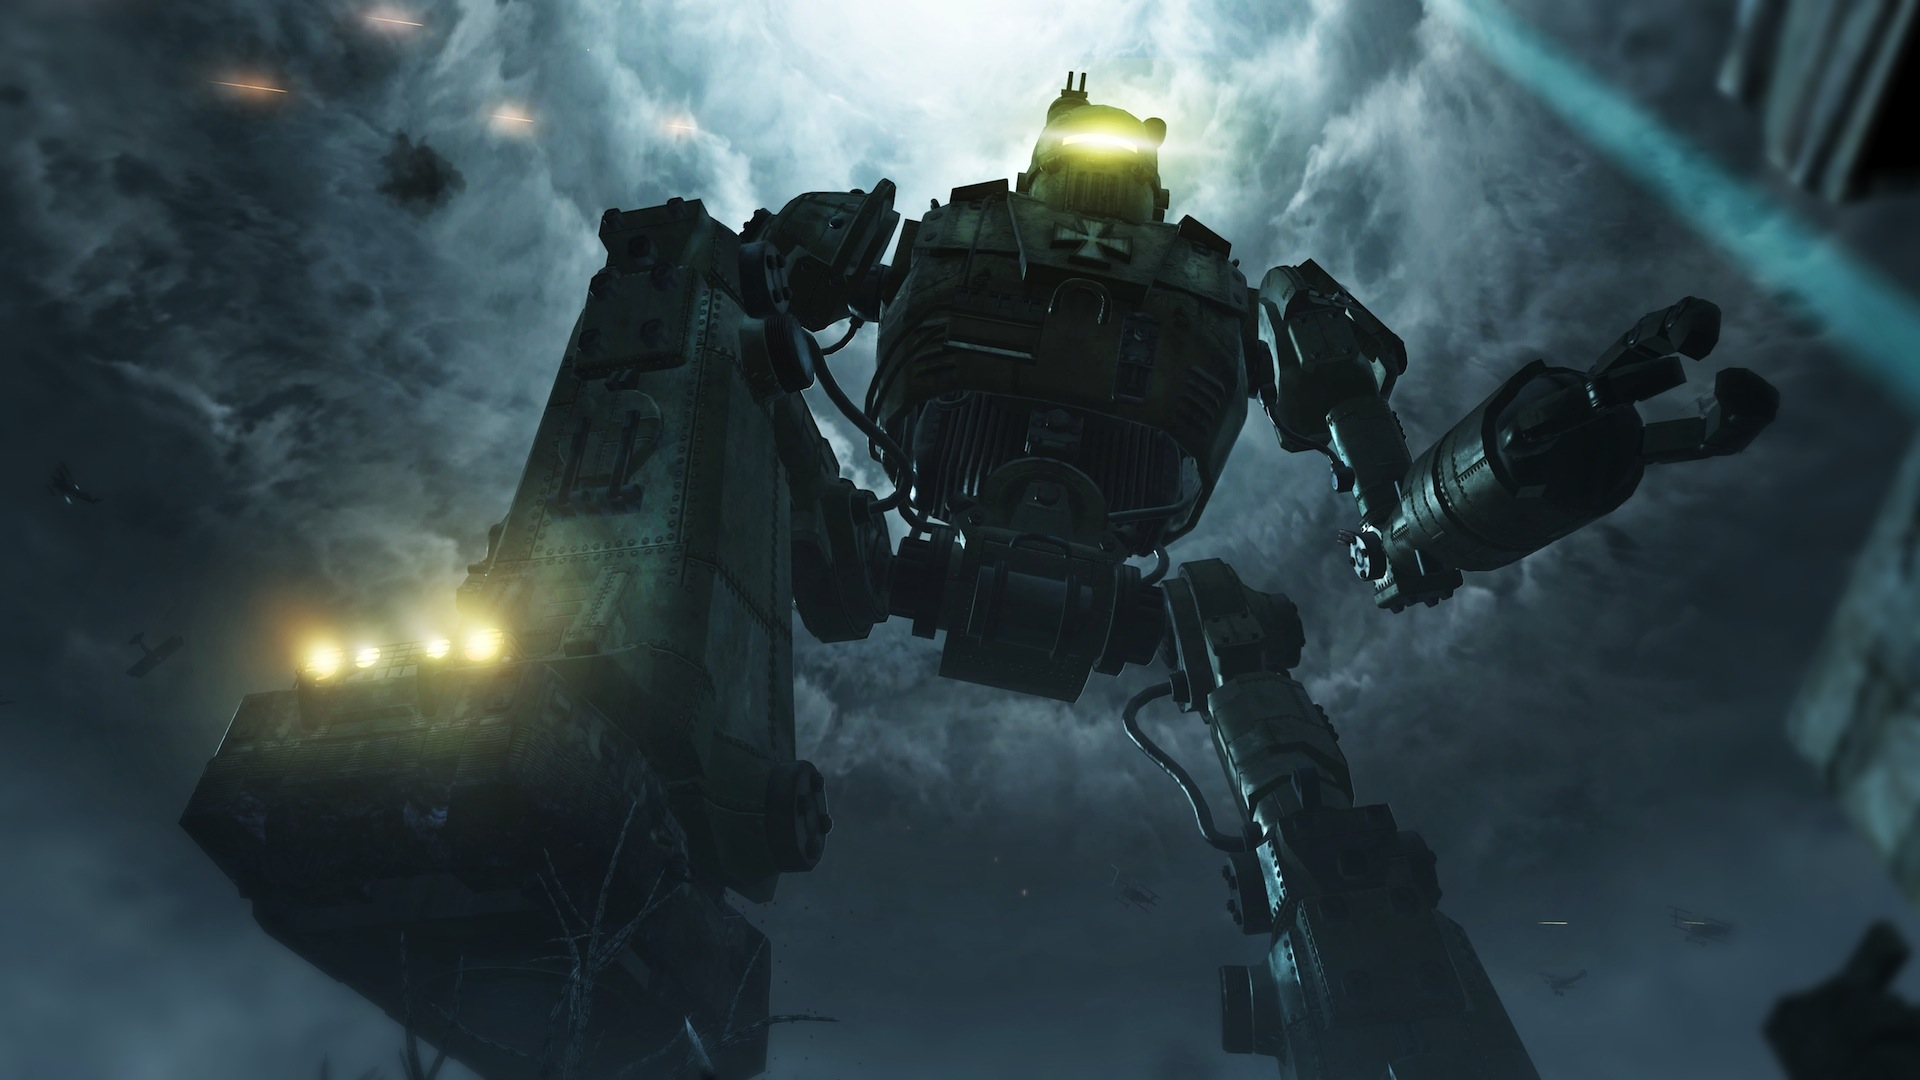 Giant Robot, Call of Duty Wiki